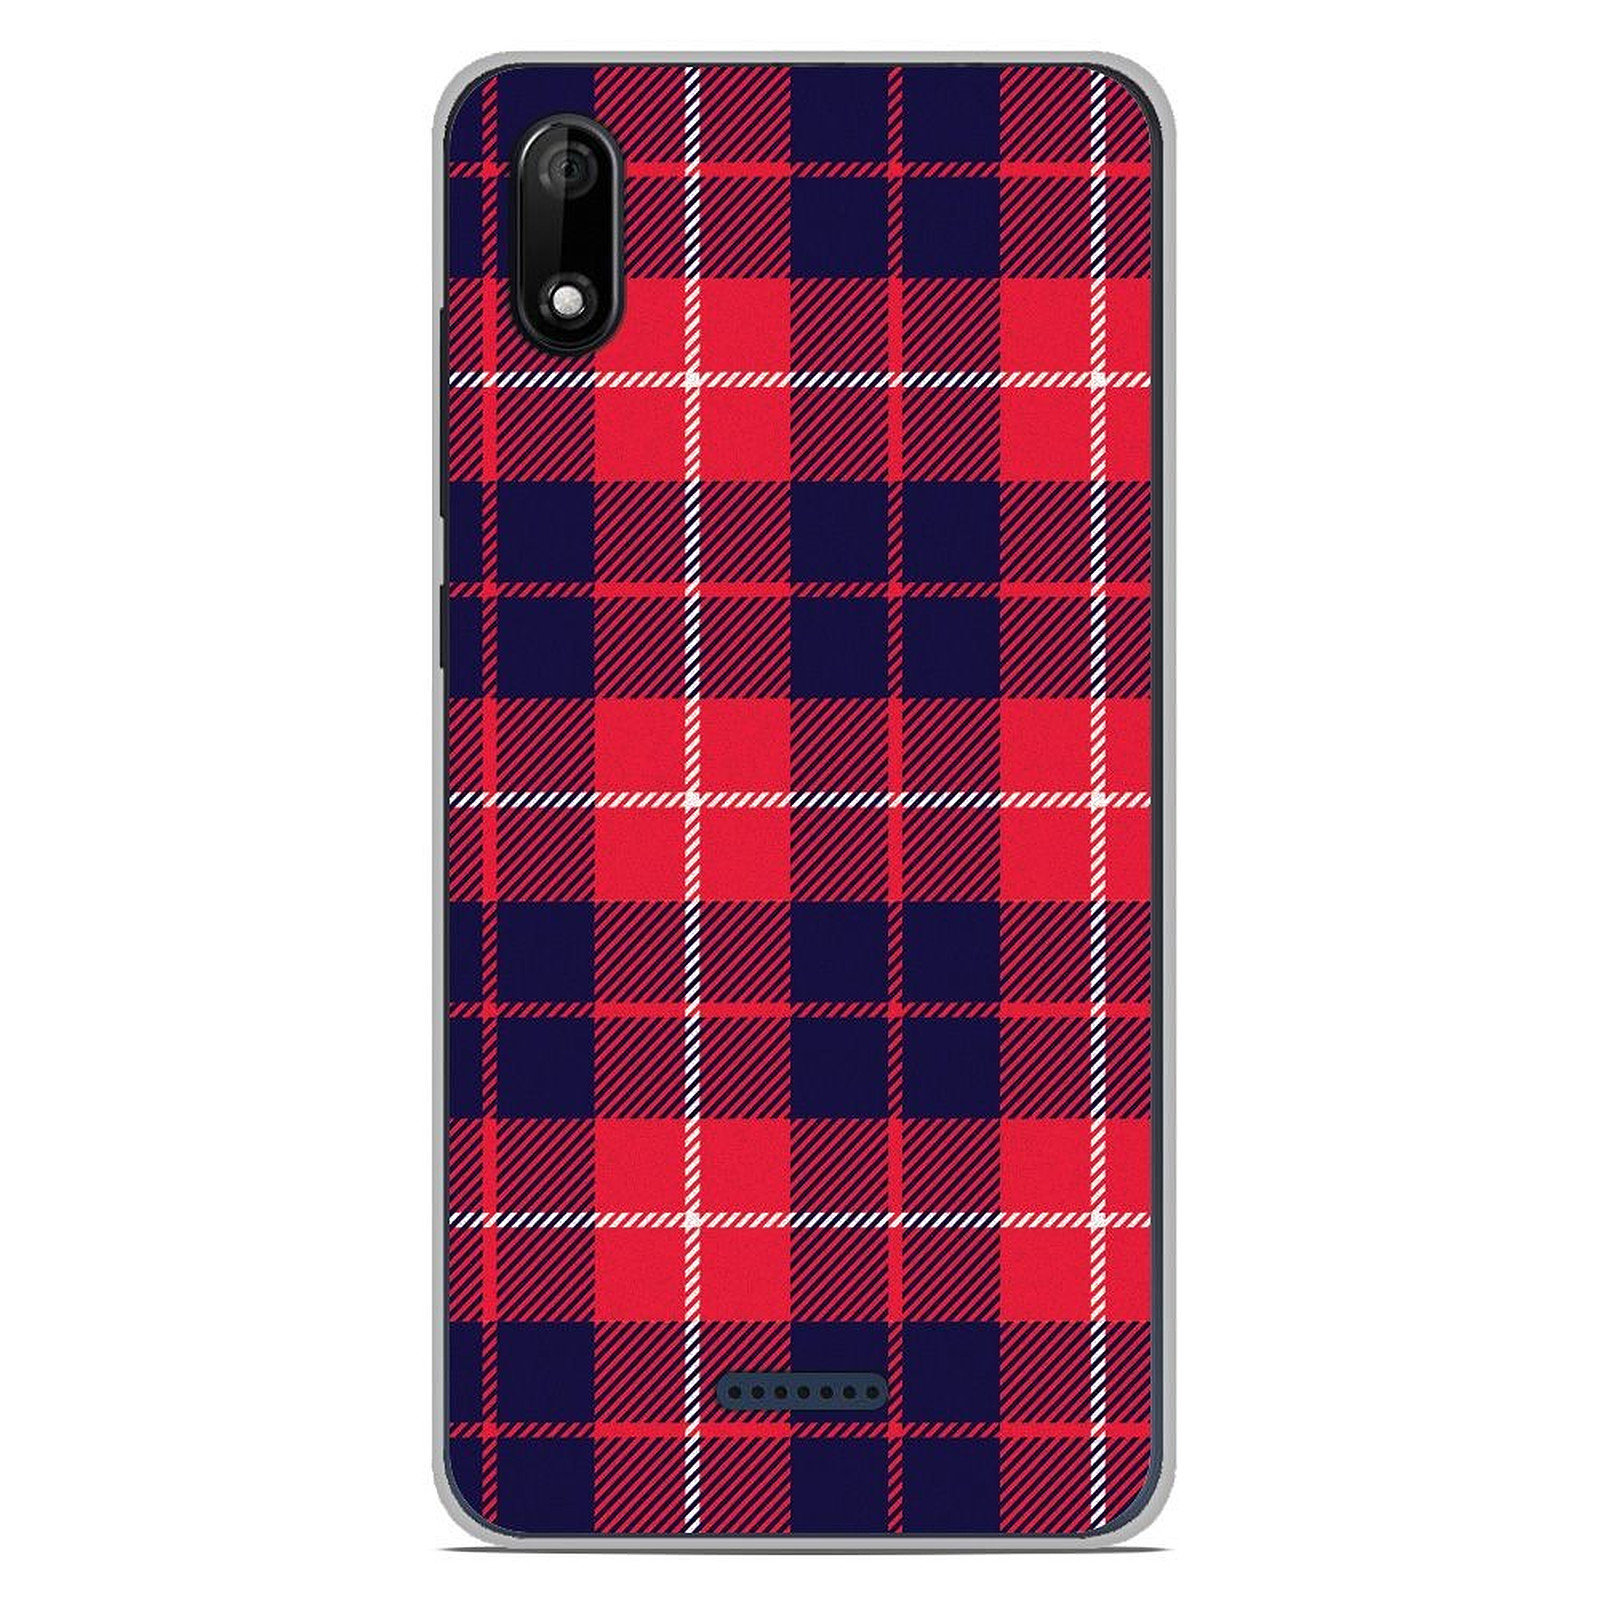 1001 Coques Coque silicone gel Wiko Y50 motif Tartan Rouge 2 - Coque telephone 1001Coques